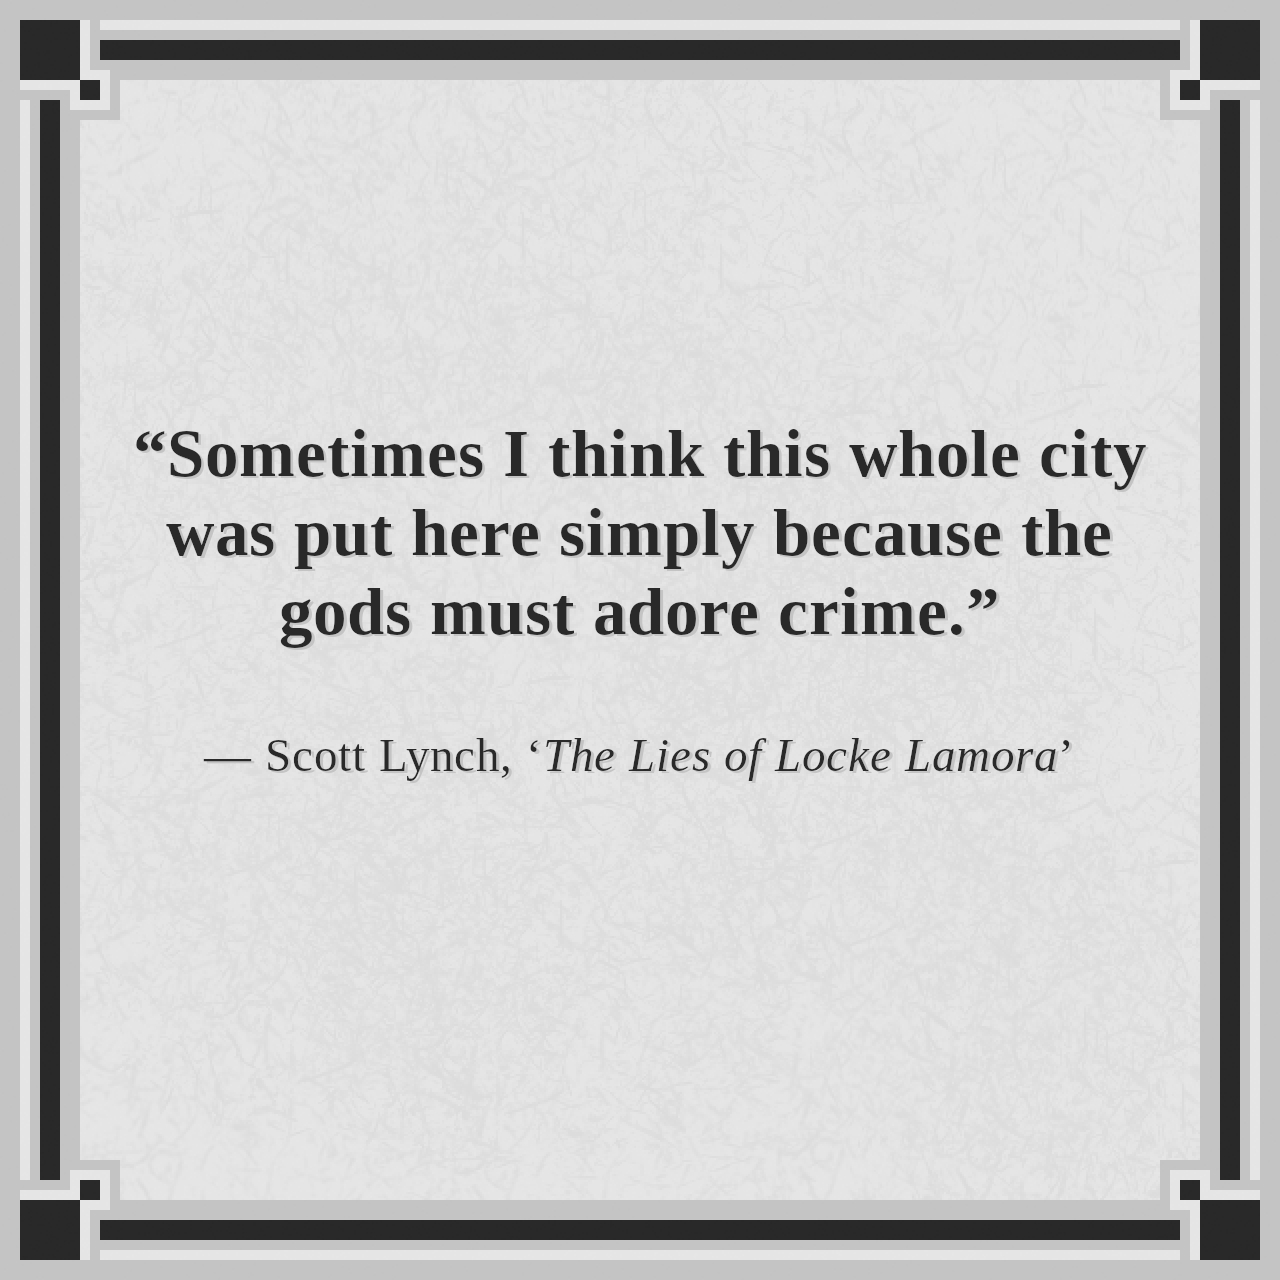 “Sometimes I think this whole city was put here simply because the gods must adore crime.”

— Scott Lynch, ‘The Lies of Locke Lamora’